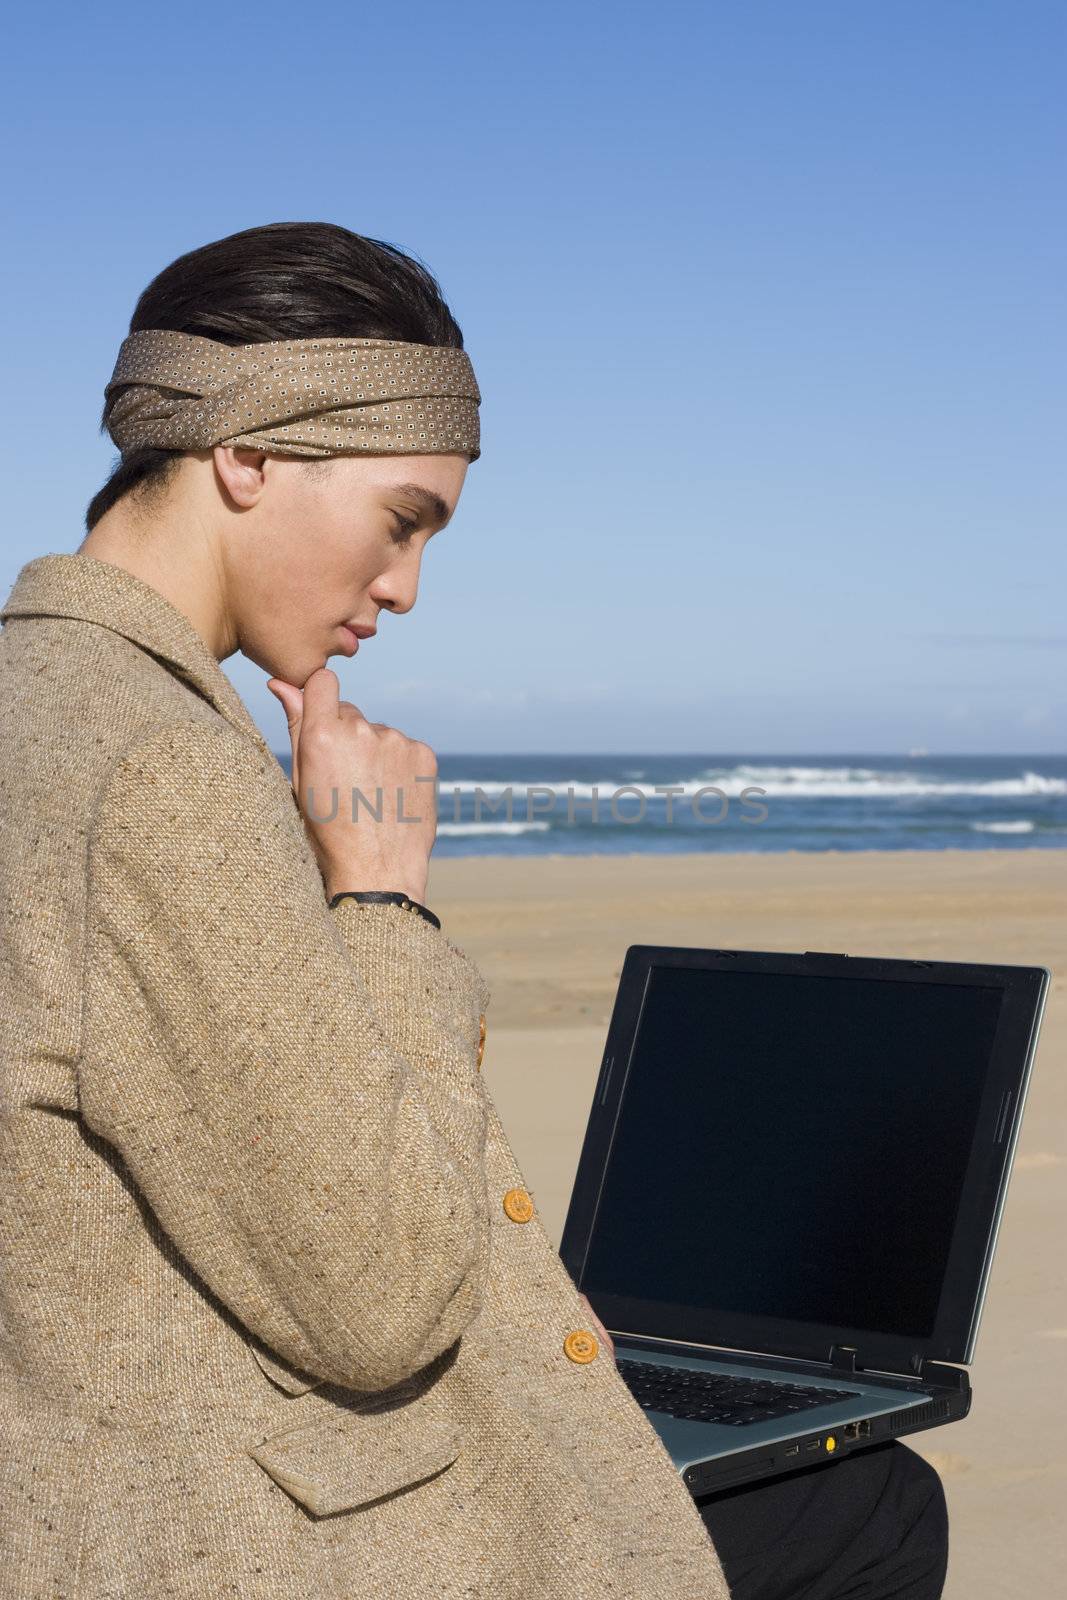 Professional working on his laptop at the beach